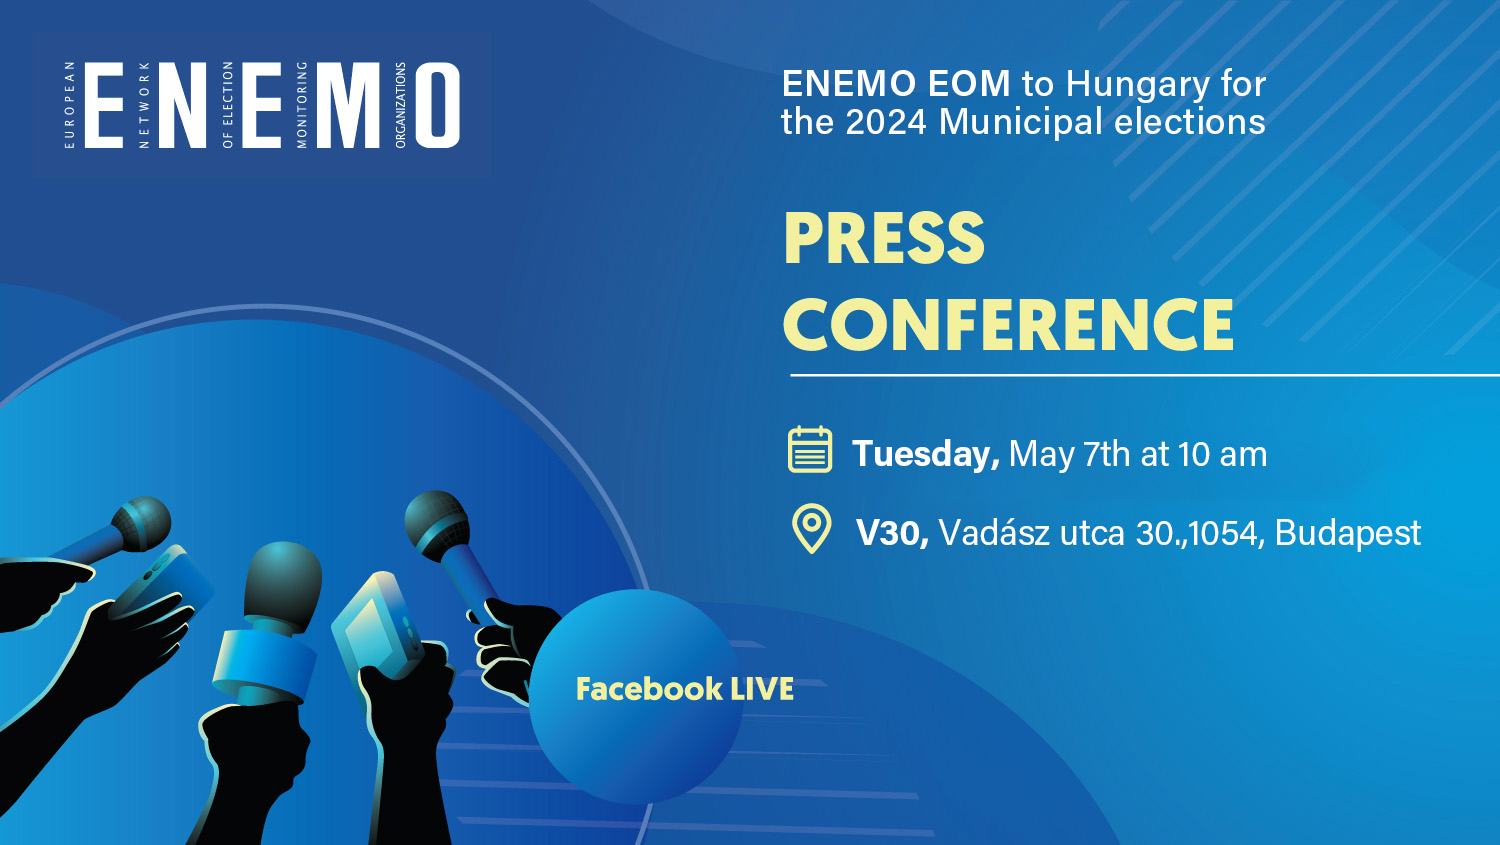 ENEMO EOM to Hungary 2024 - First press conference